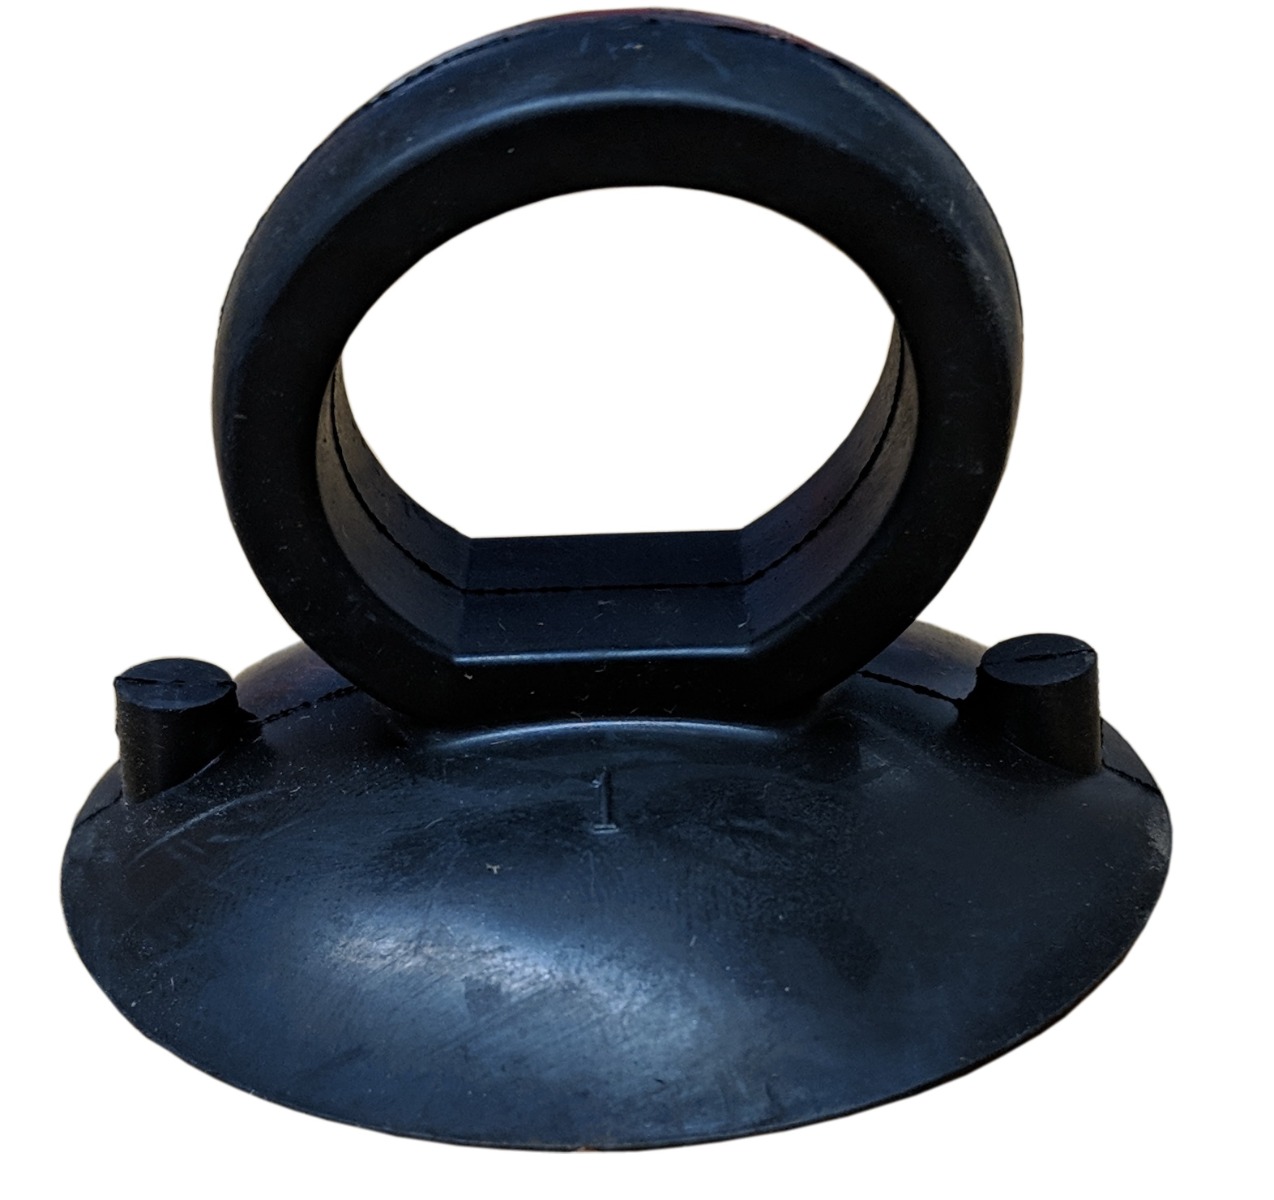 Bushing cover suction cup removal tool